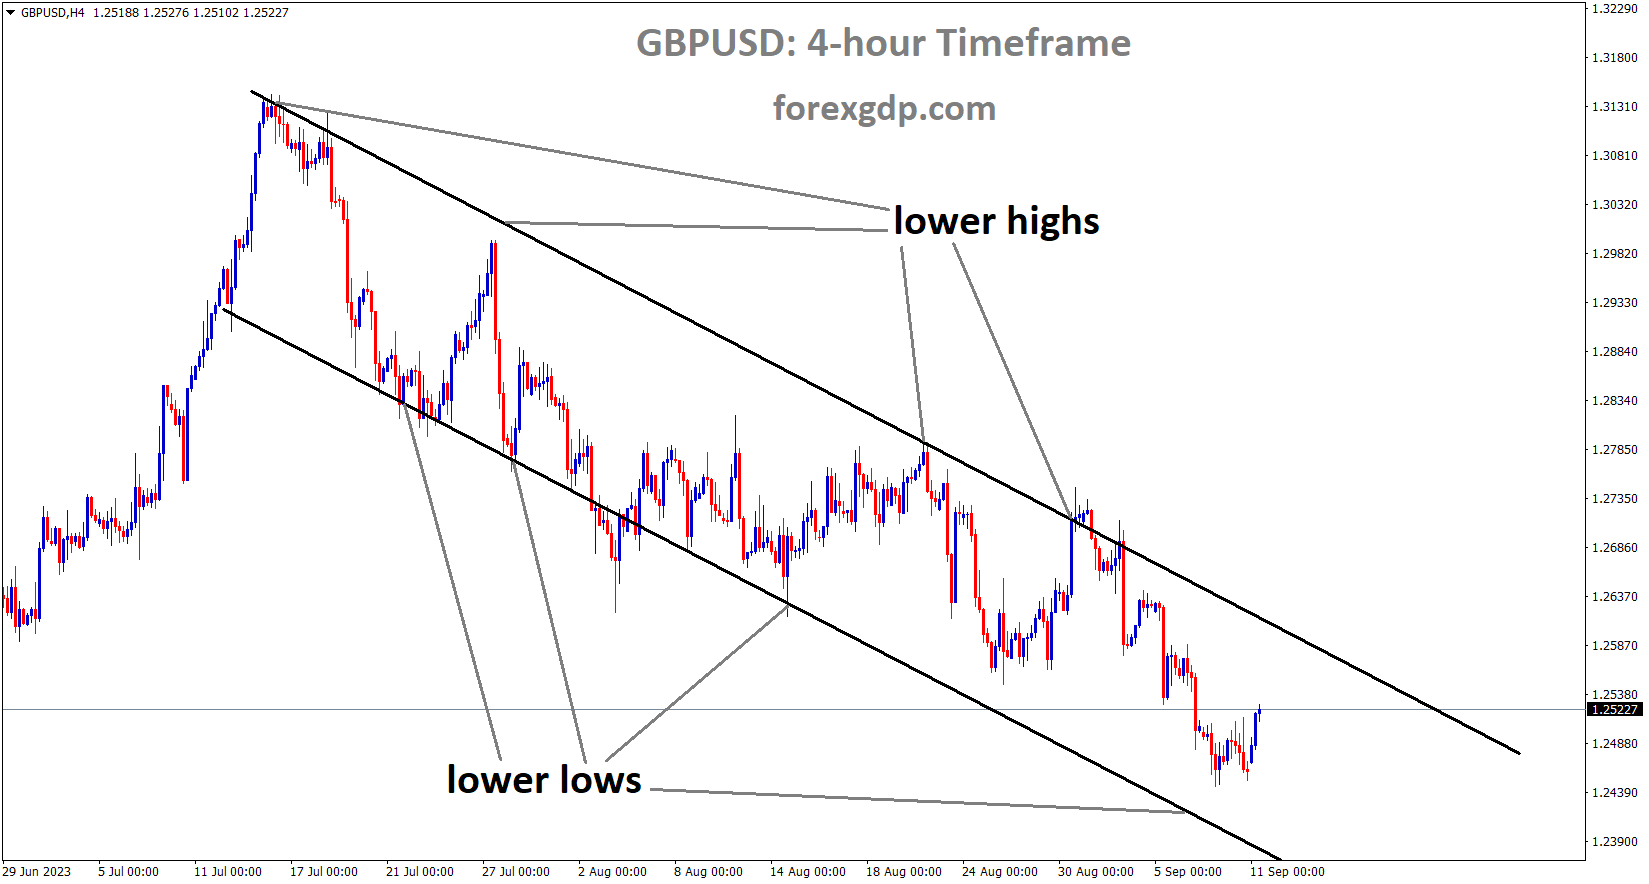 GBPUSD is moving in the Descending channel and the market has rebounded from the lower low area of the channel